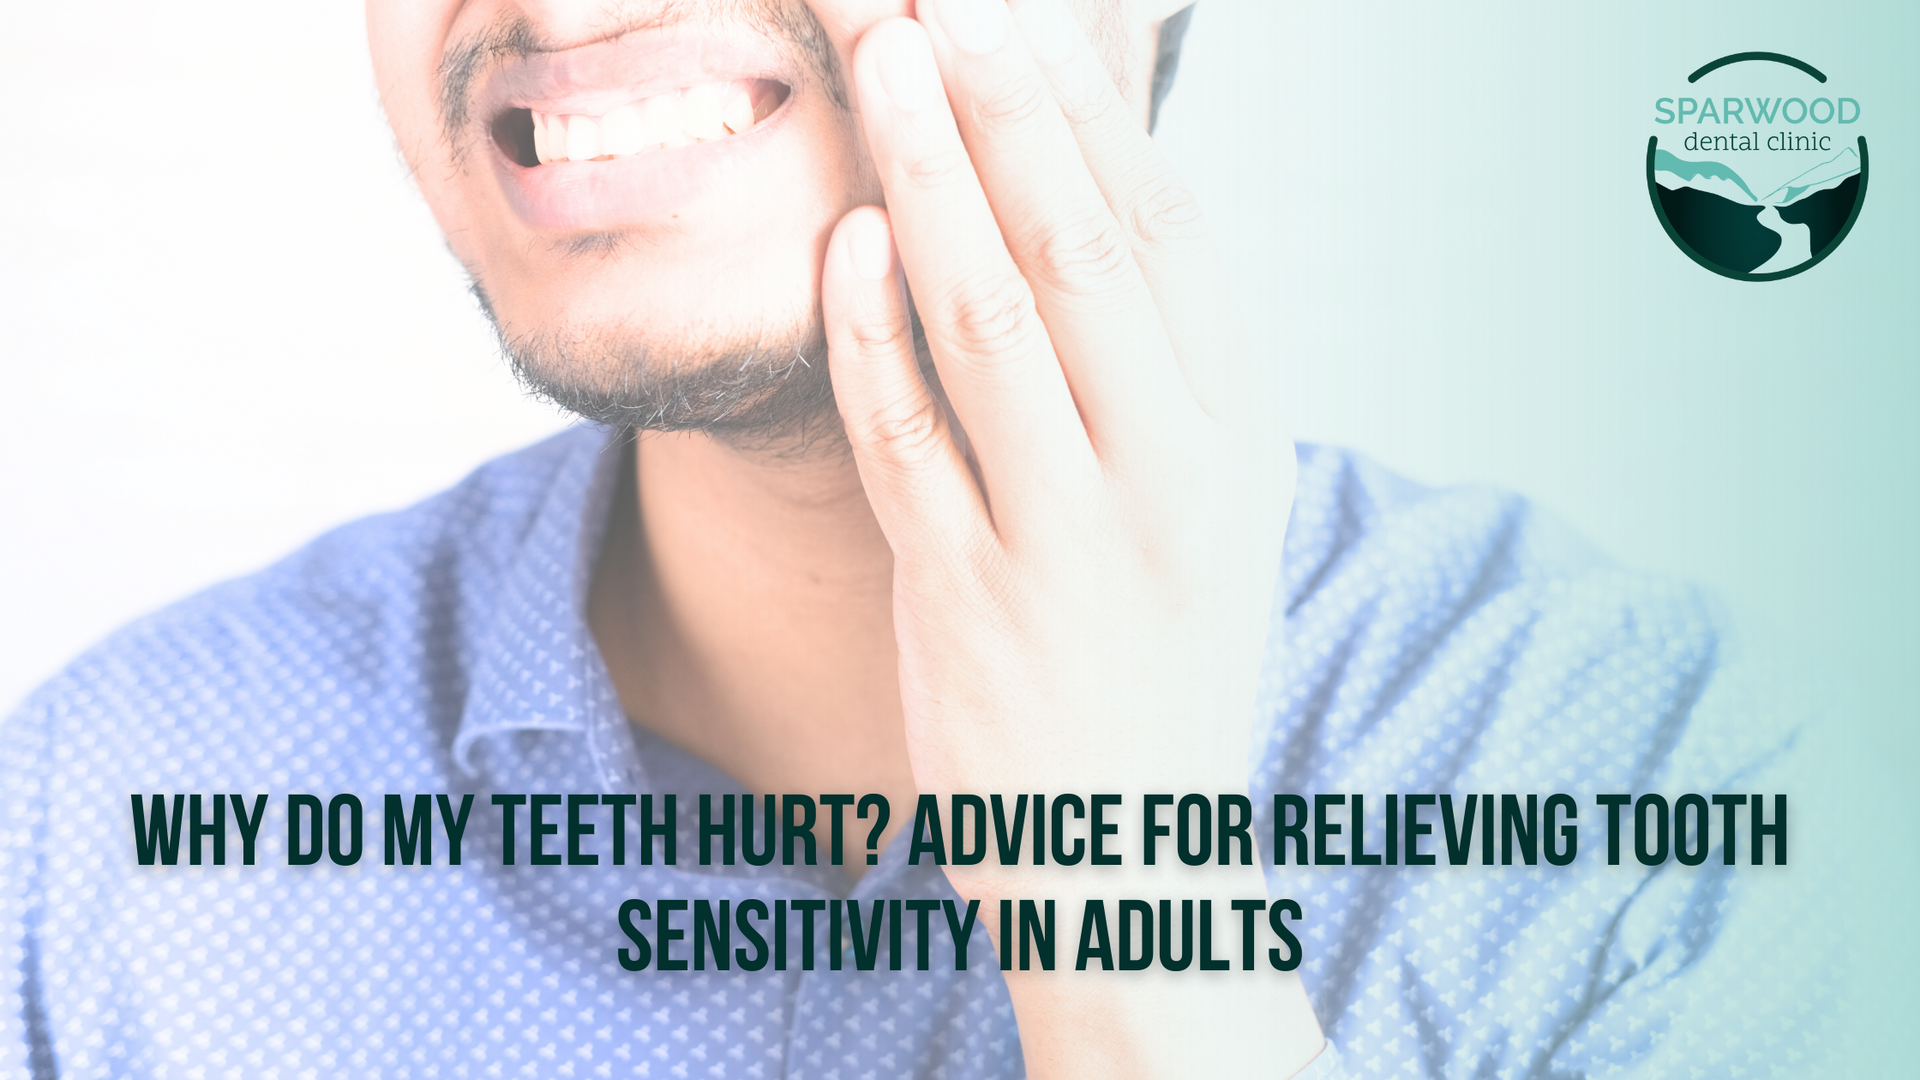 Why do my teeth hurt ? advice for relieving tooth sensitivity in adults